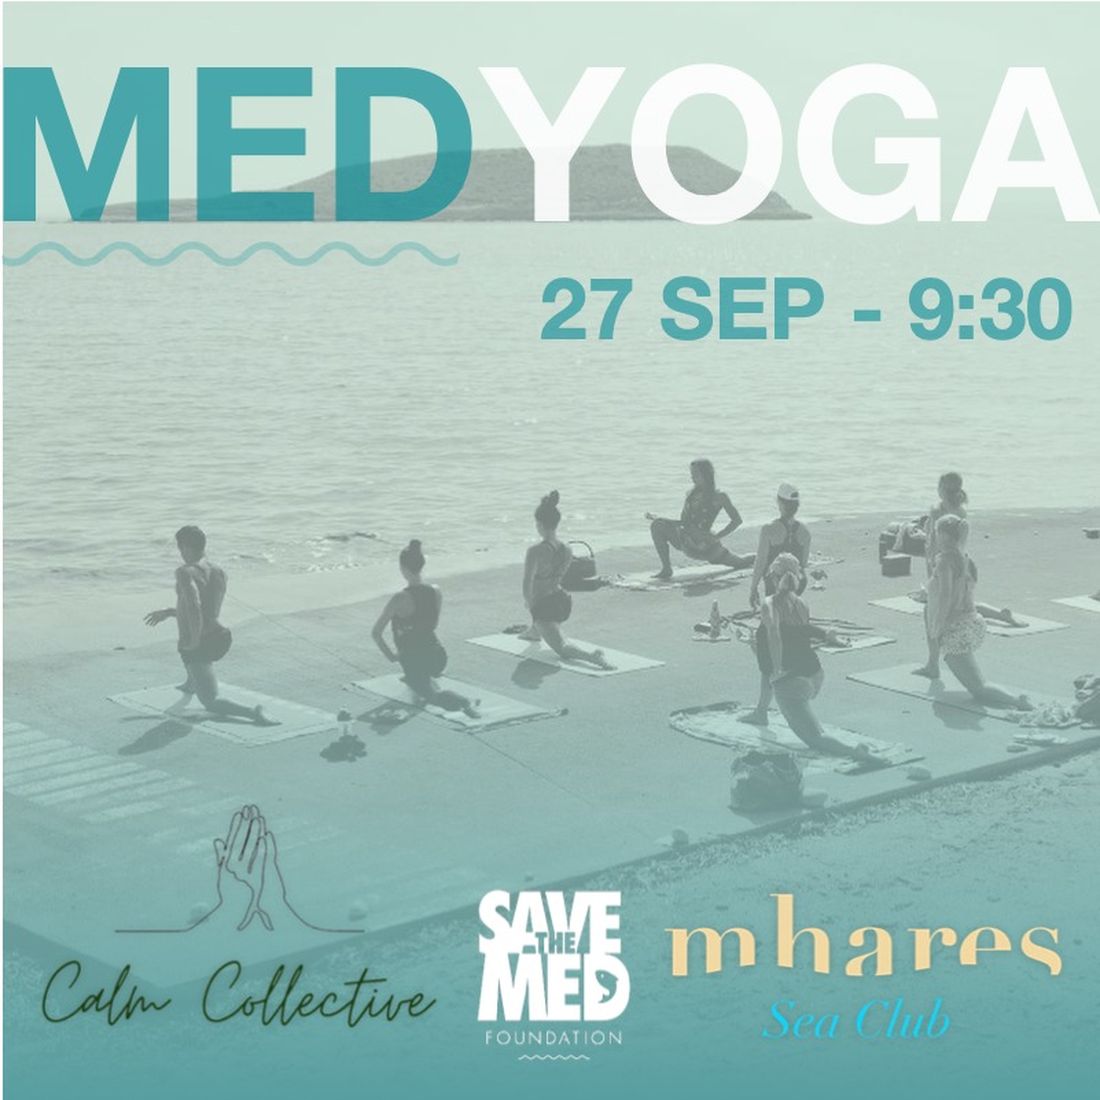 Join us for MED YOGA by the sea!